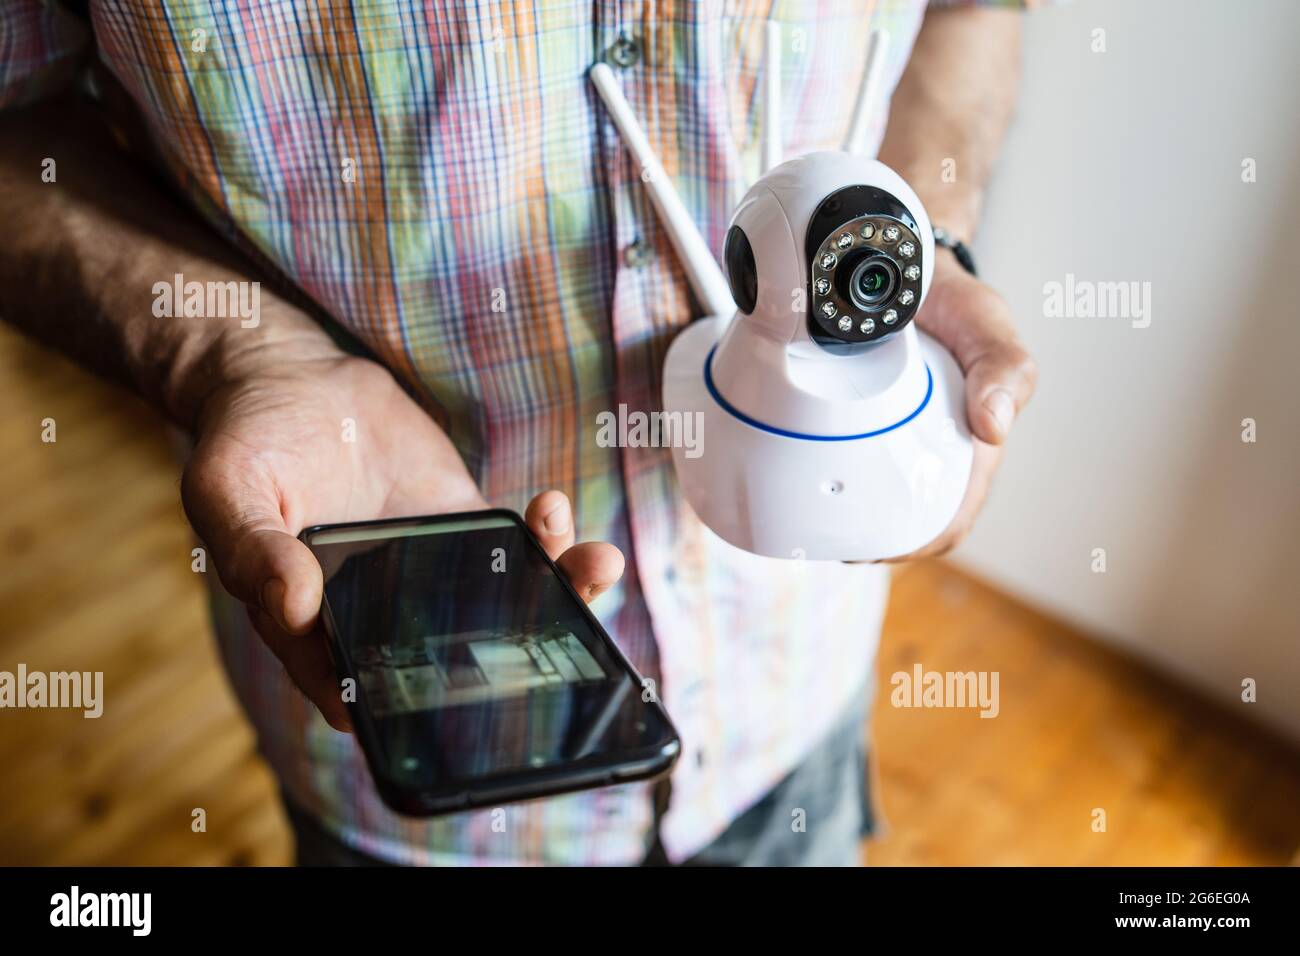 Close up on midsection of unknown man holding home security surveillance camera and mobile phone trying to install an app top view copy space Stock Photo